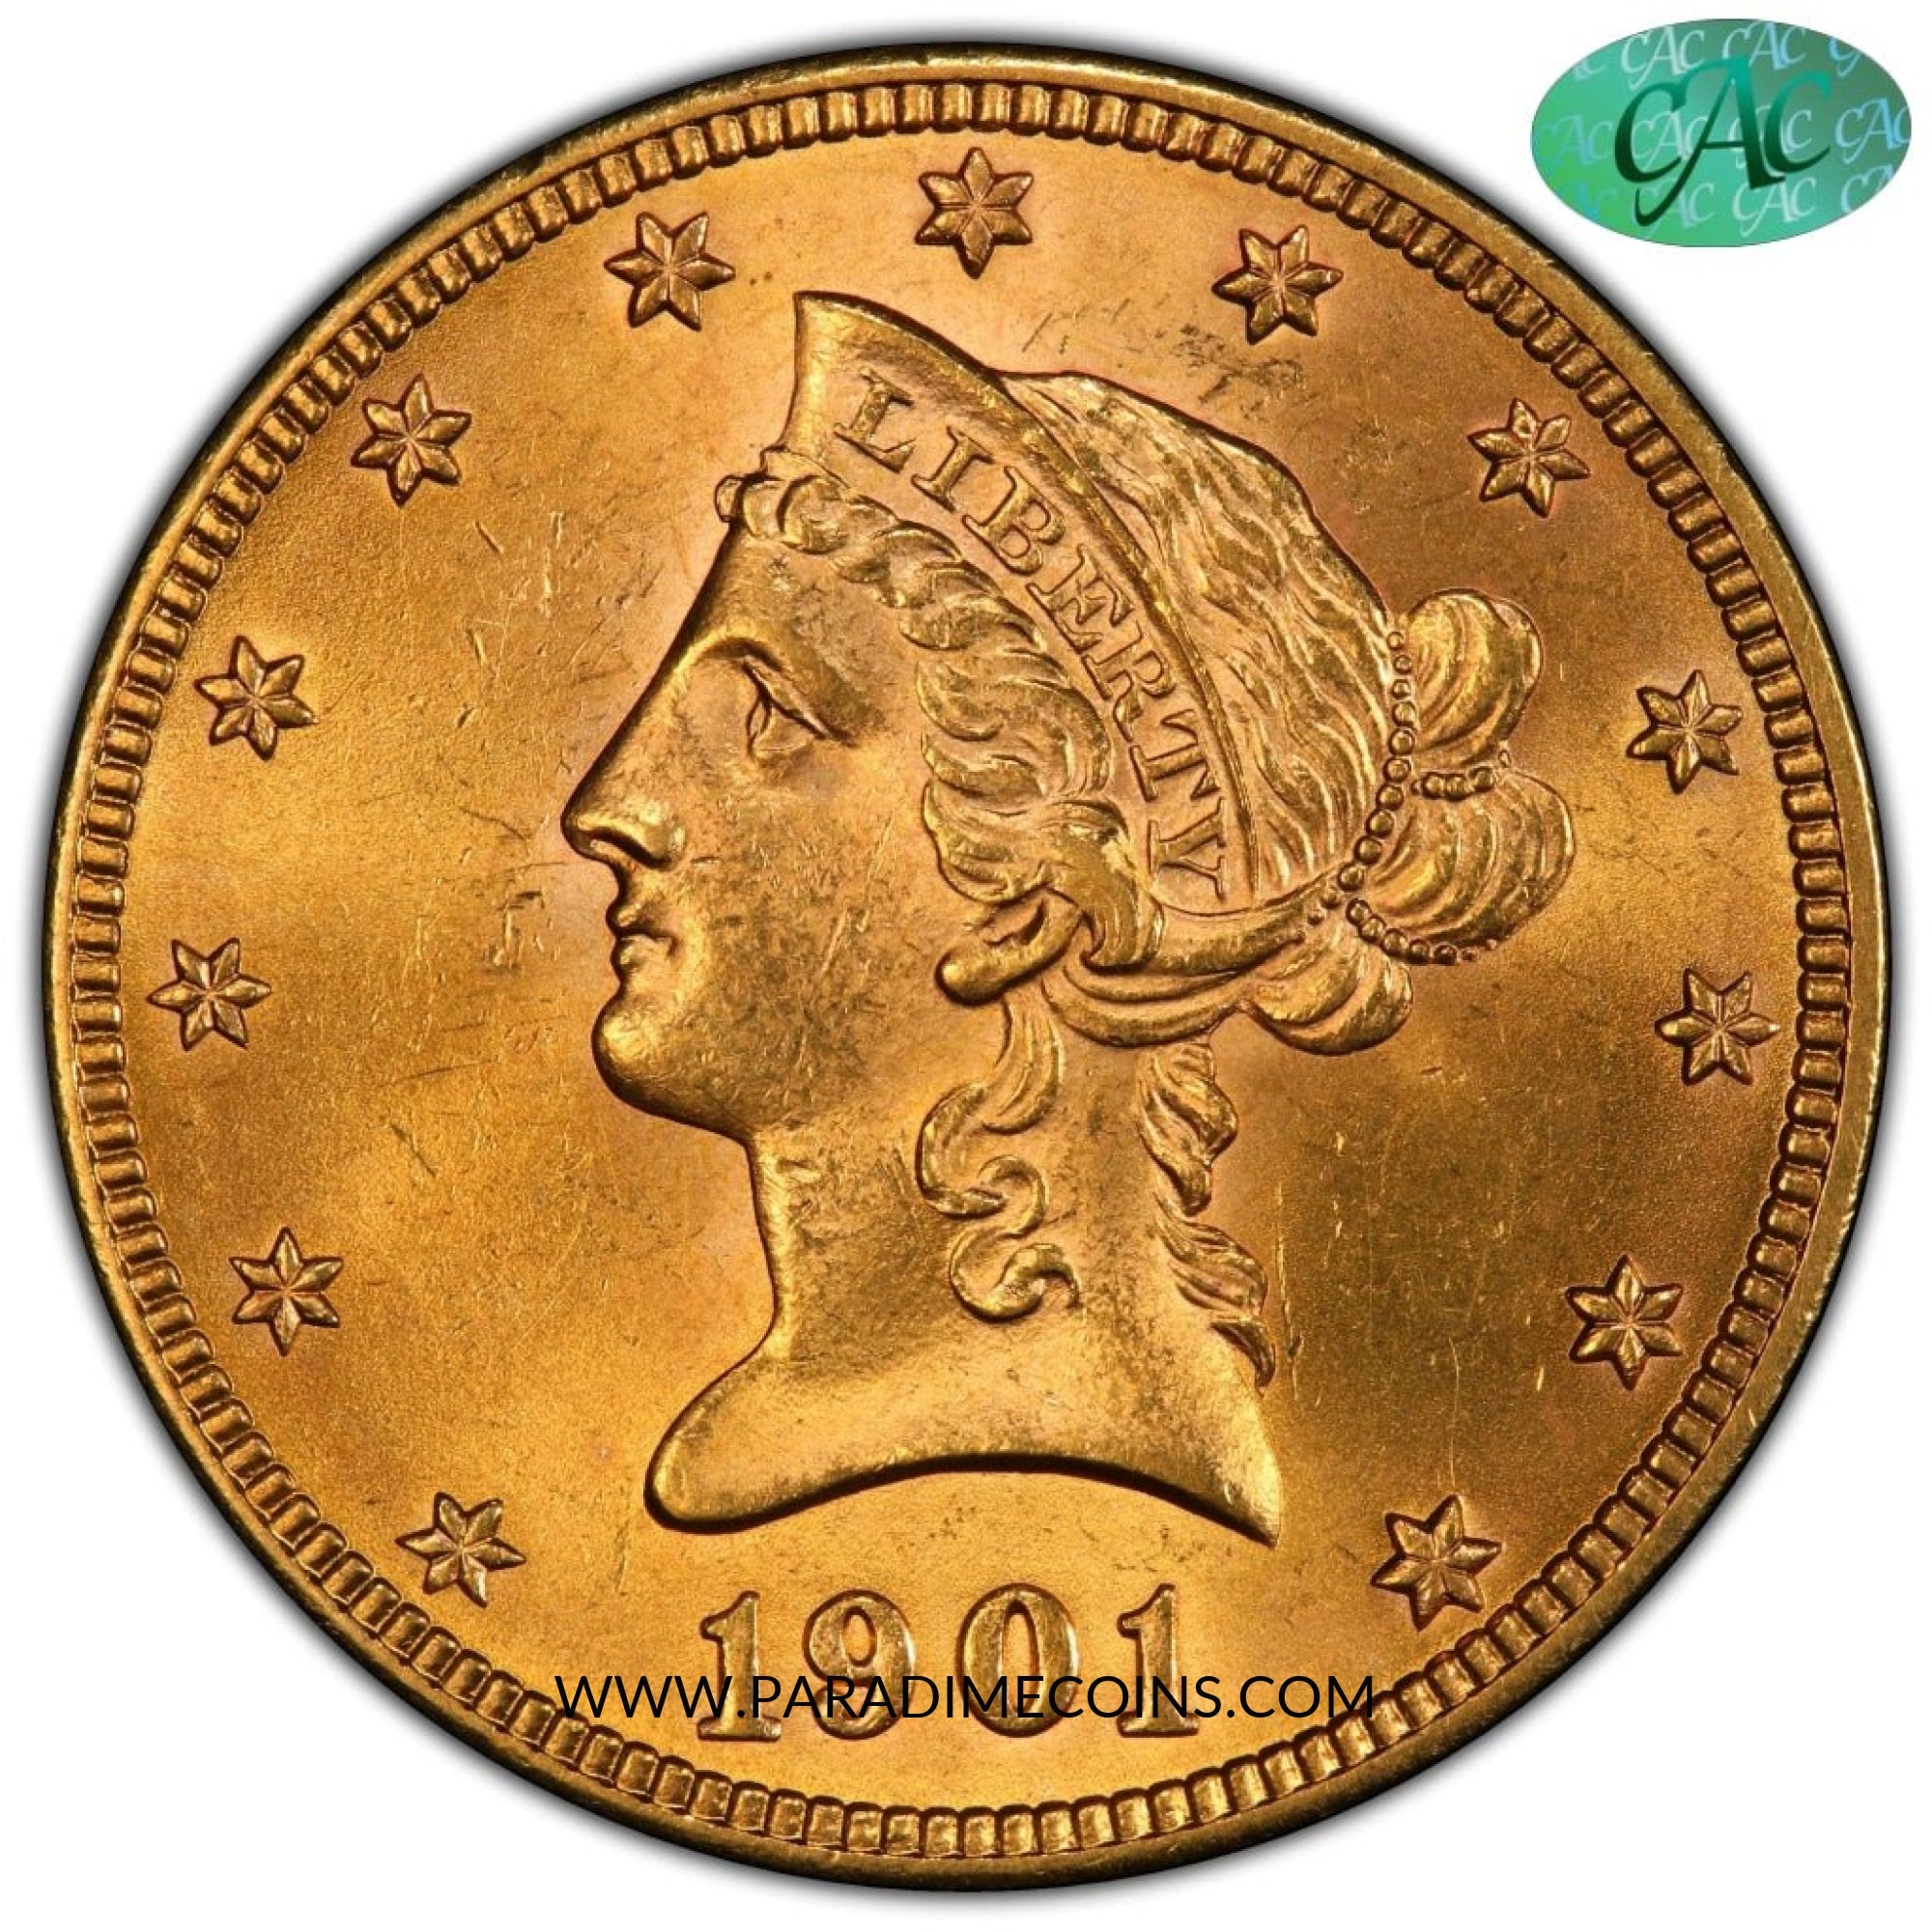 1901 $10 MS64 PCGS CAC - Paradime Coins | PCGS NGC CACG CAC Rare US Numismatic Coins For Sale